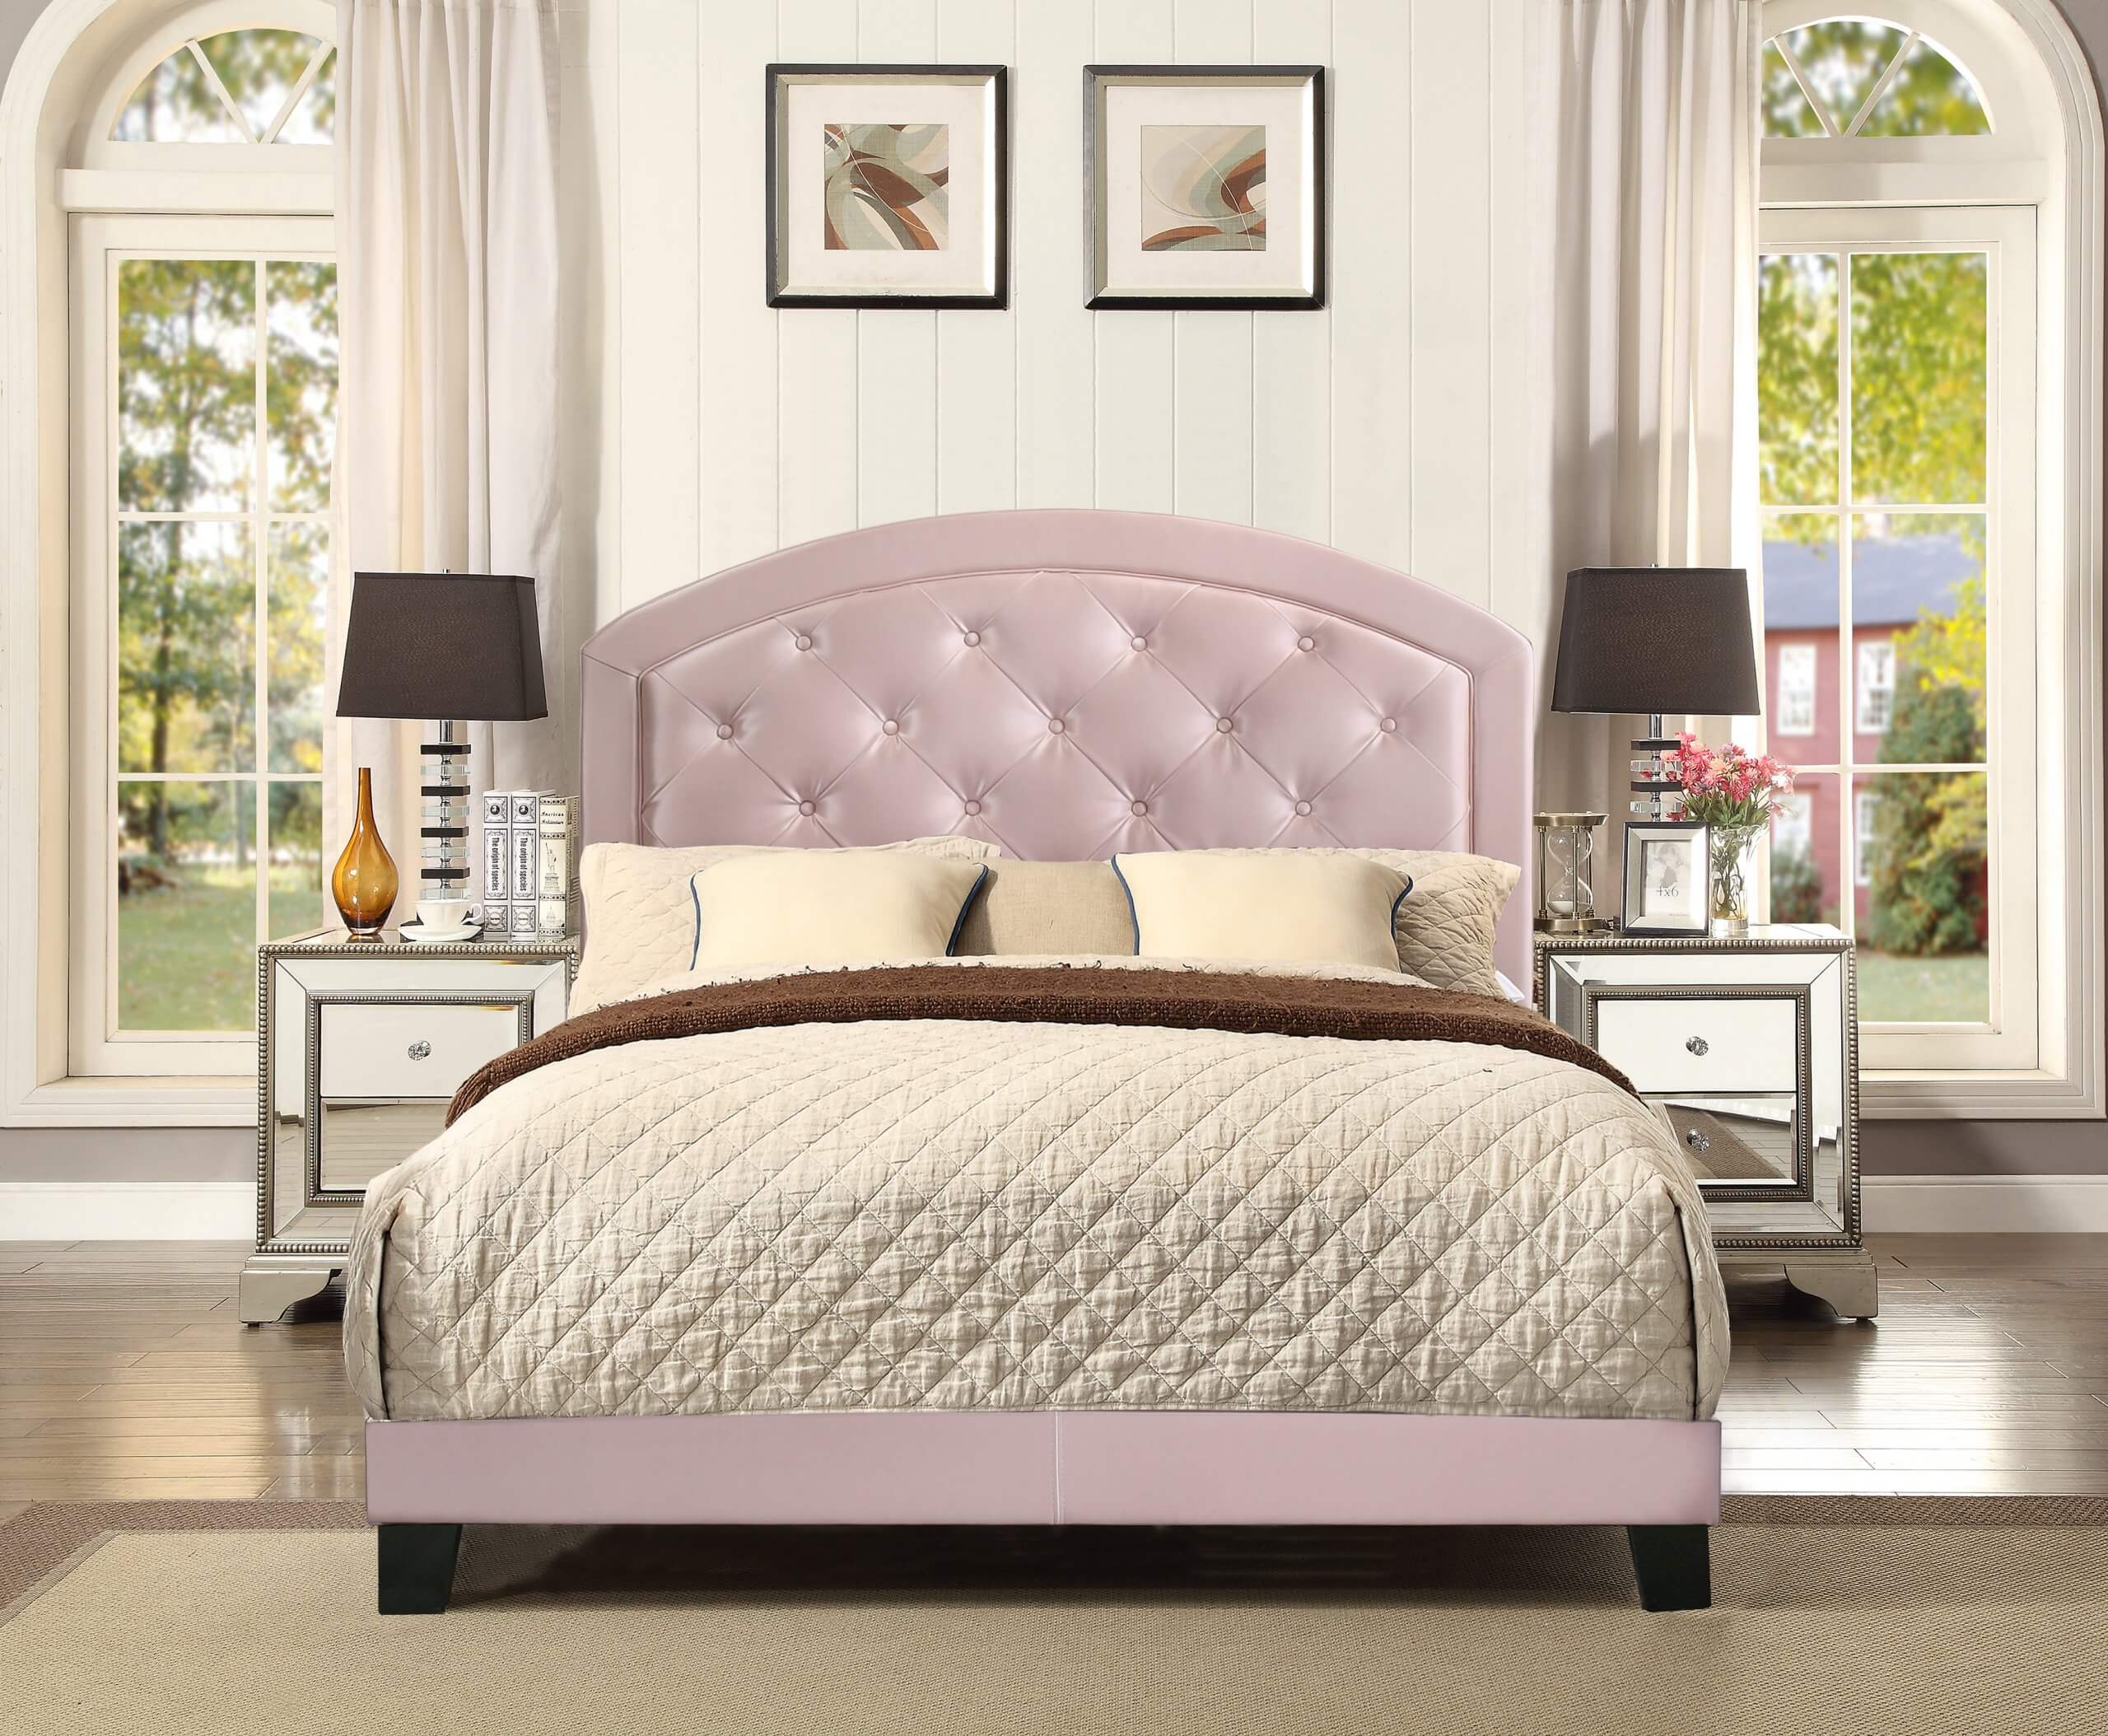 Gaby Pink Tufted Platform Bed Urban, Pink Tufted Twin Bed